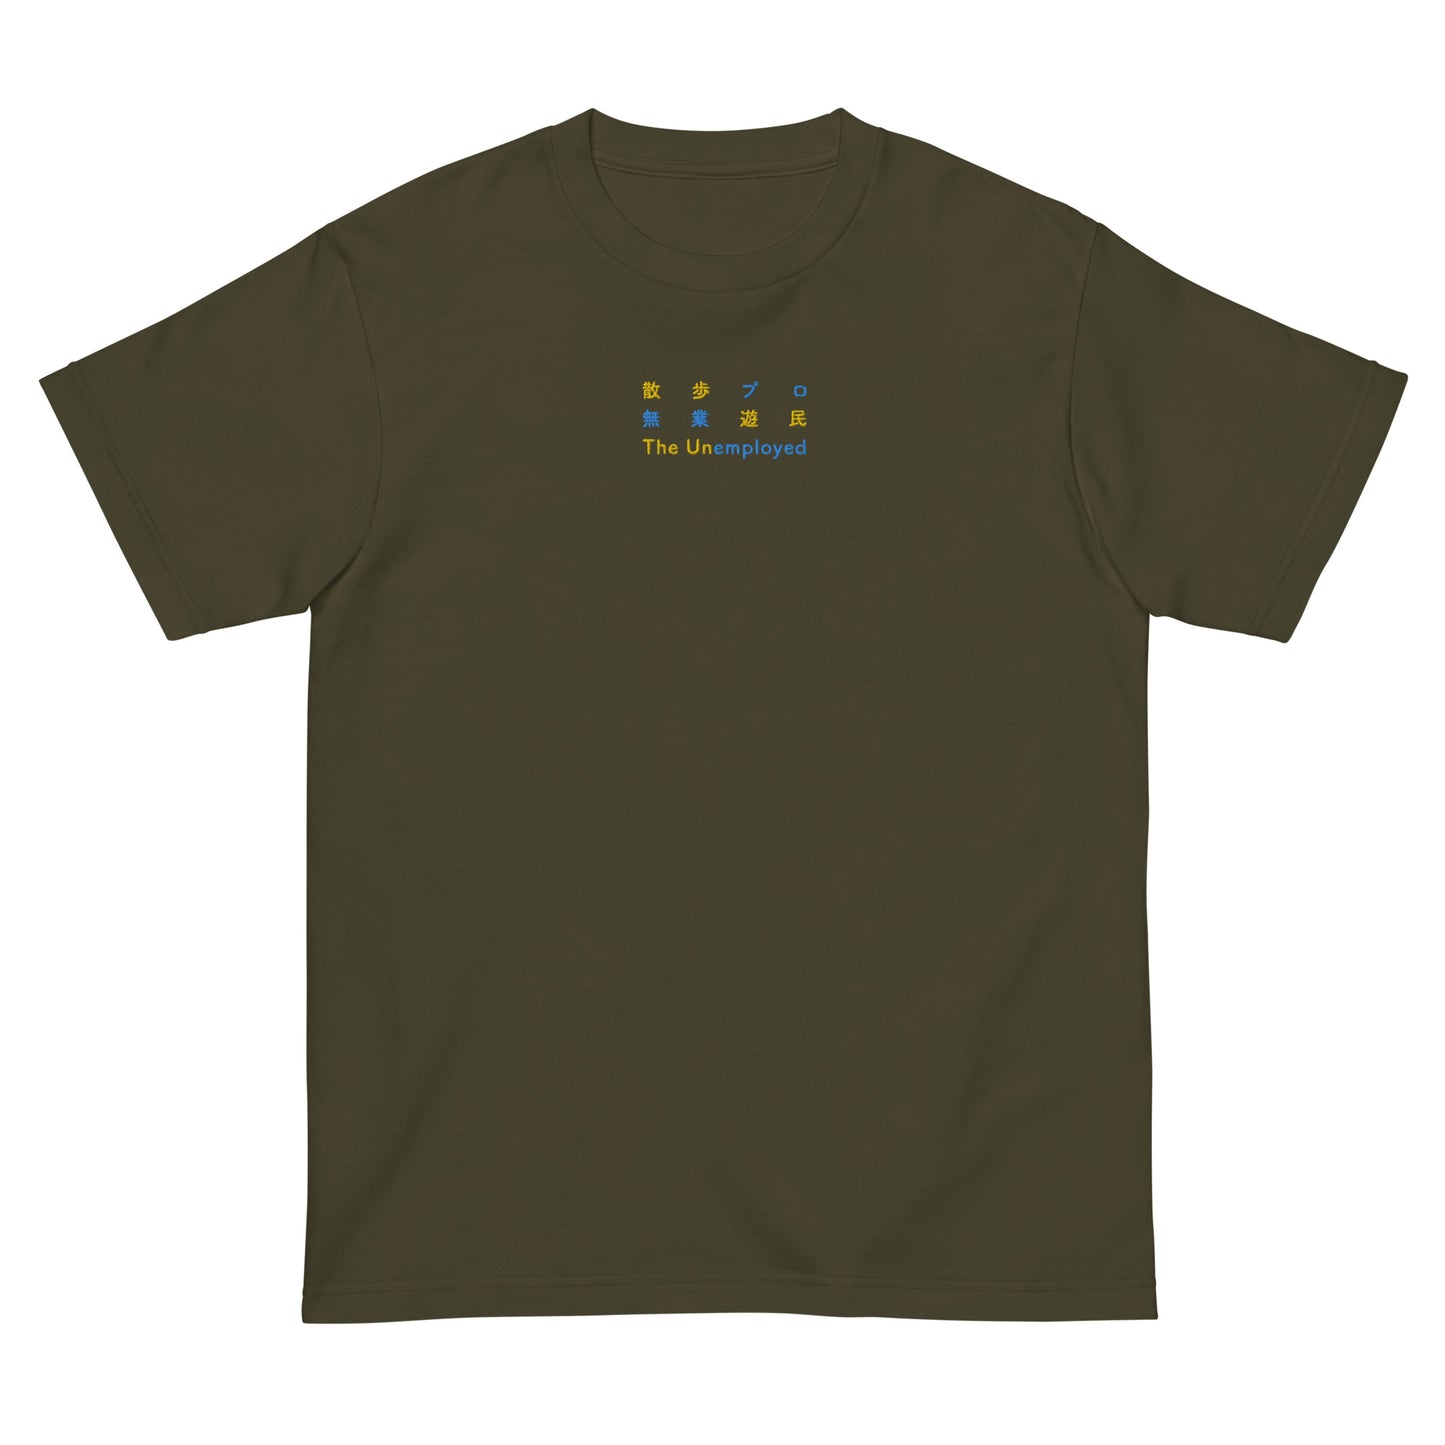 Military Green High Quality Tee - Front Design with Yellow/Blue Embroidery "The Unemployed" in three languages